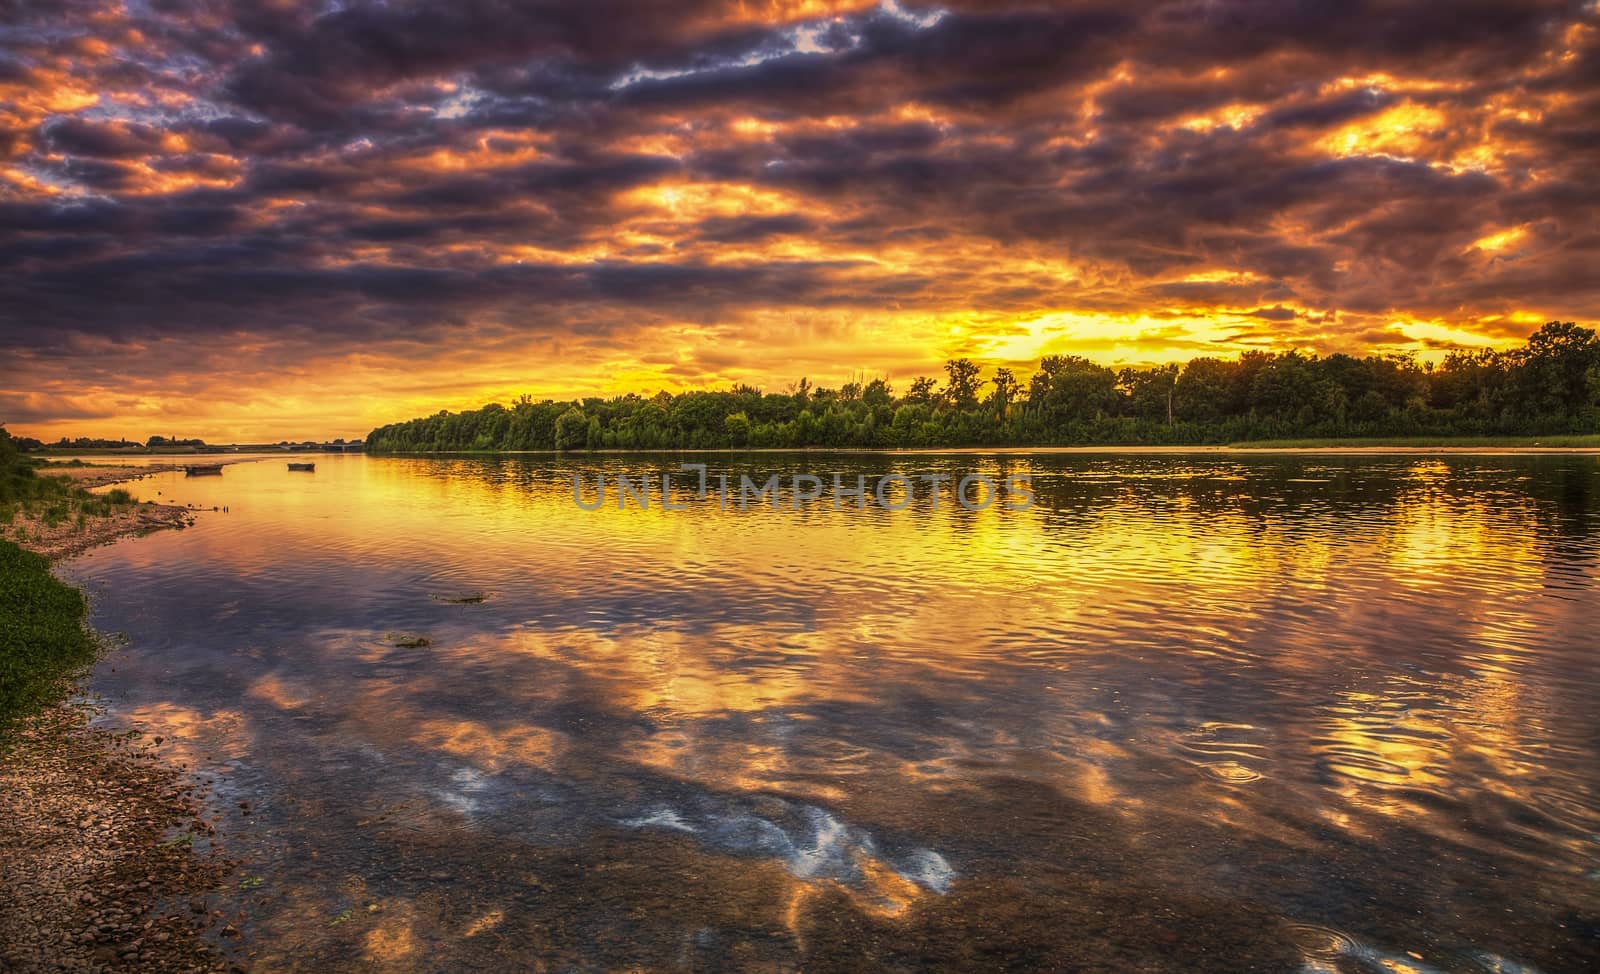 Sunset on the Loire River in France by RazvanPhotography